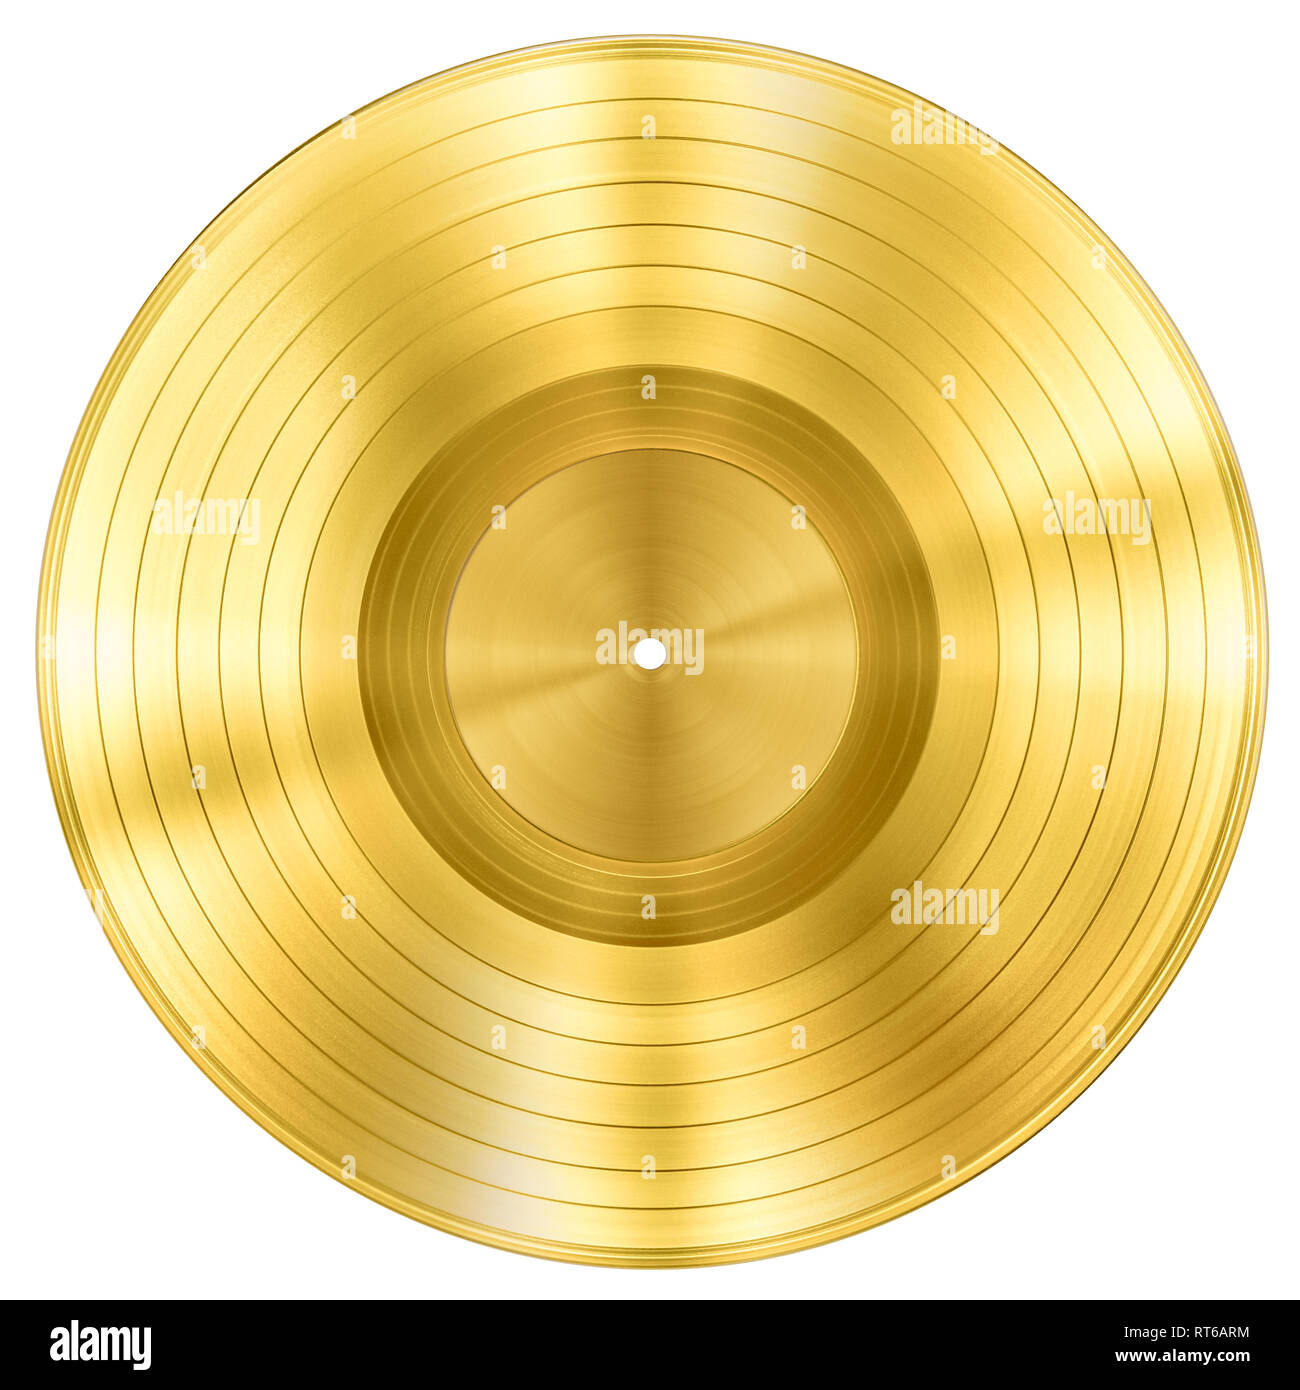 gold record music disc award isolated Stock Photo